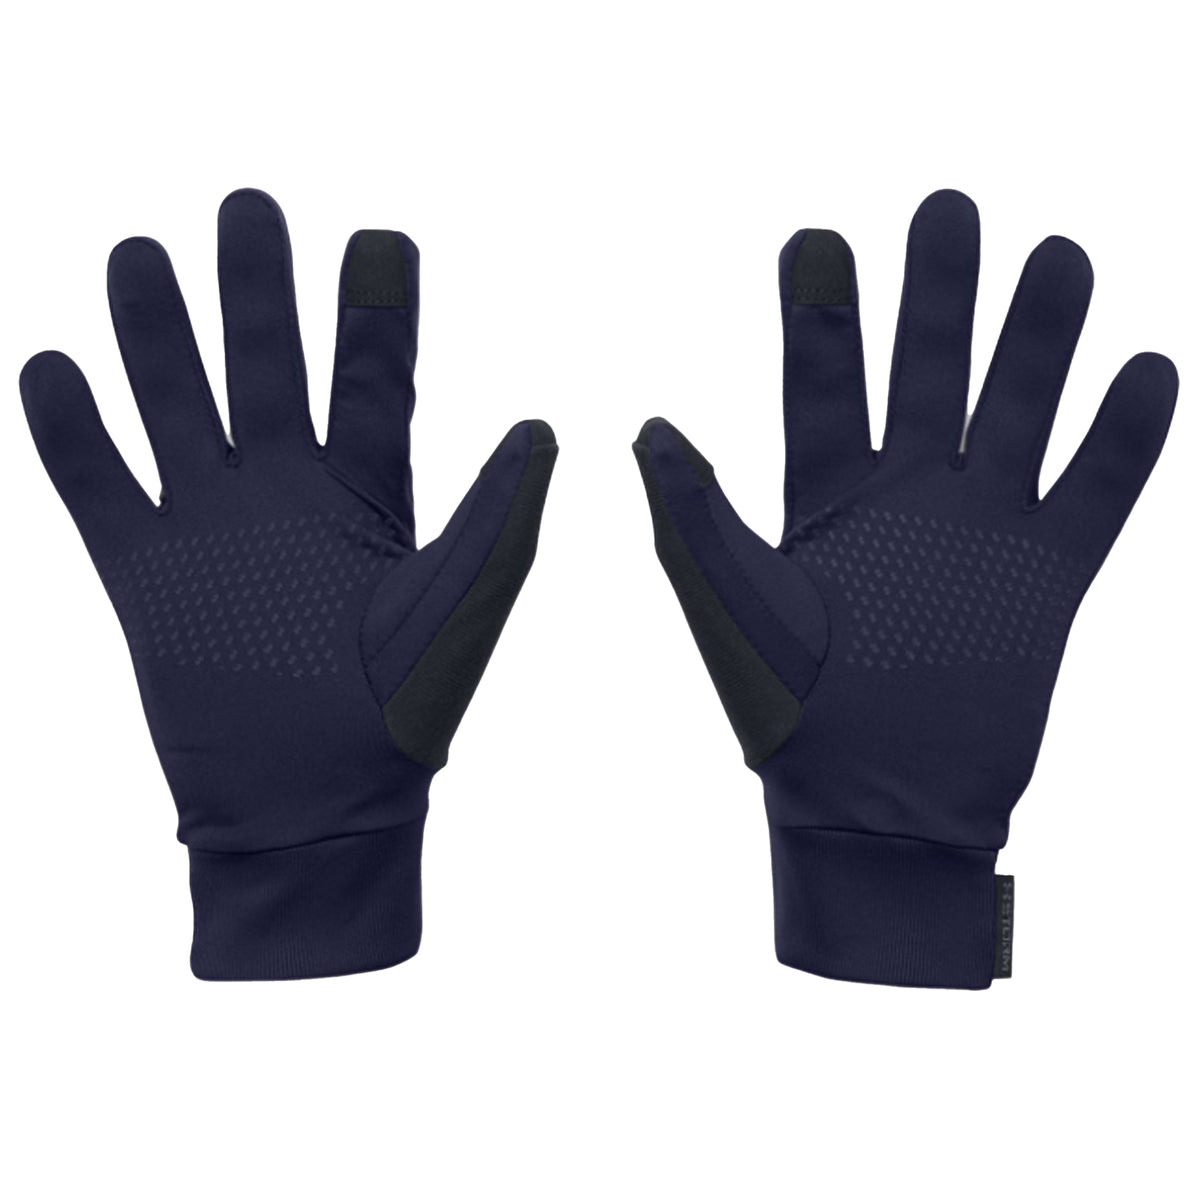 Under Armour Liner Storm Gloves: Navy